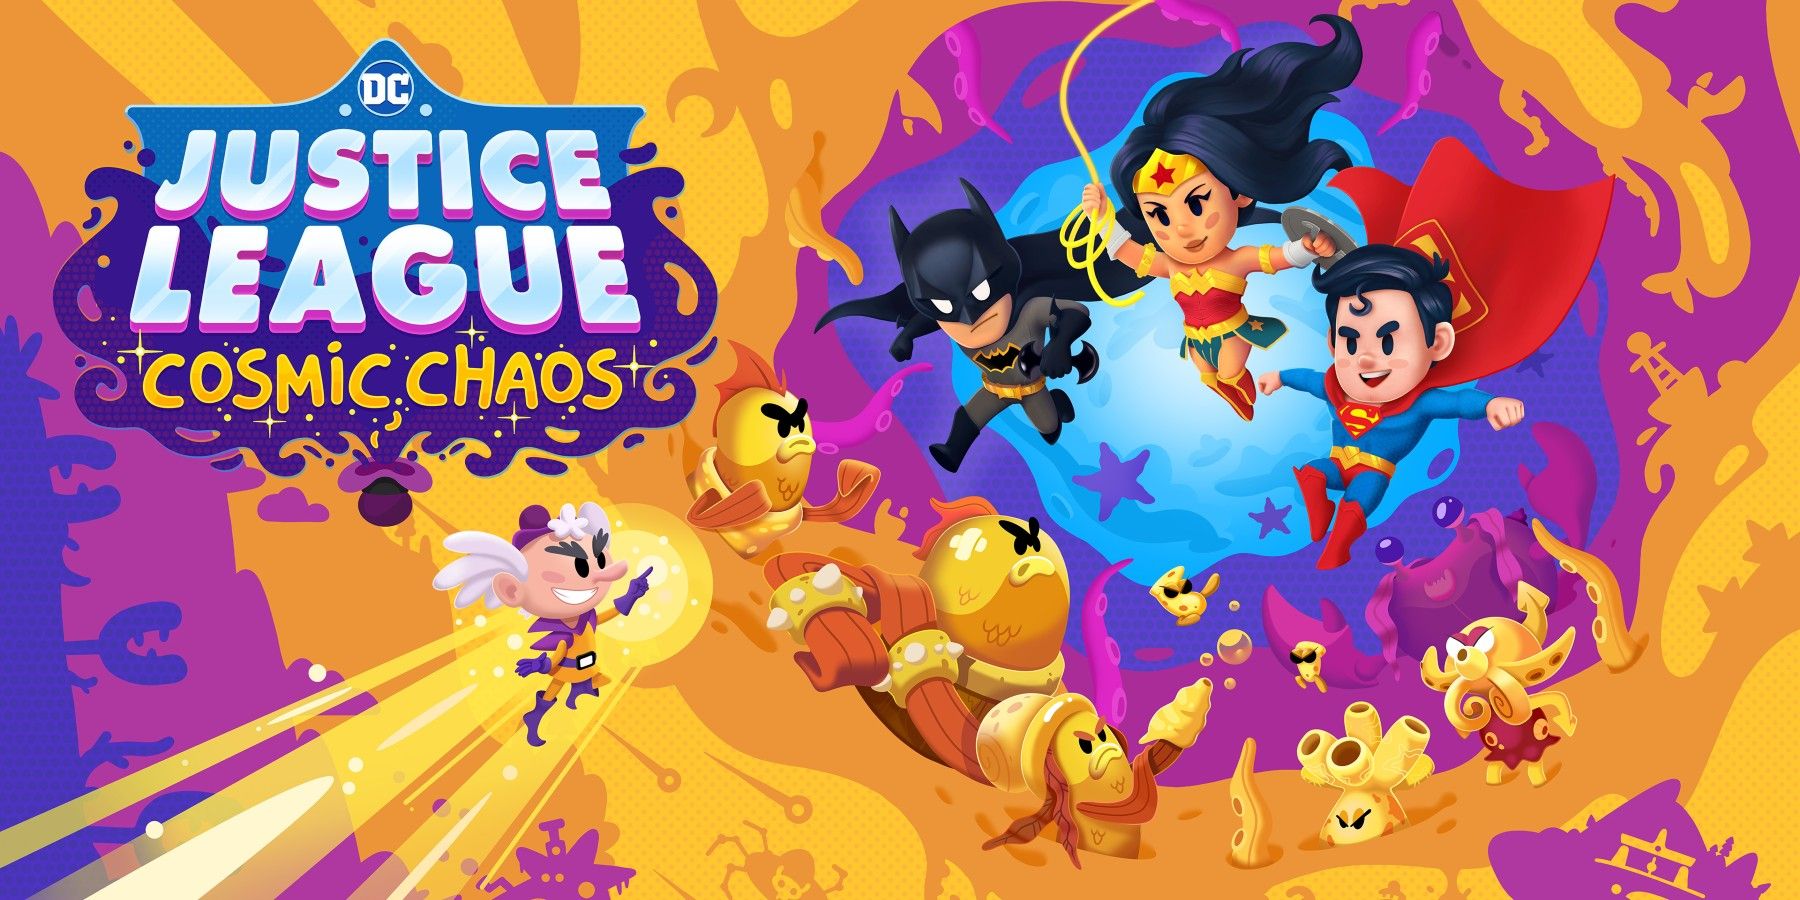 Justice League Cosmic Chaos is an Open World Game With Co-Op